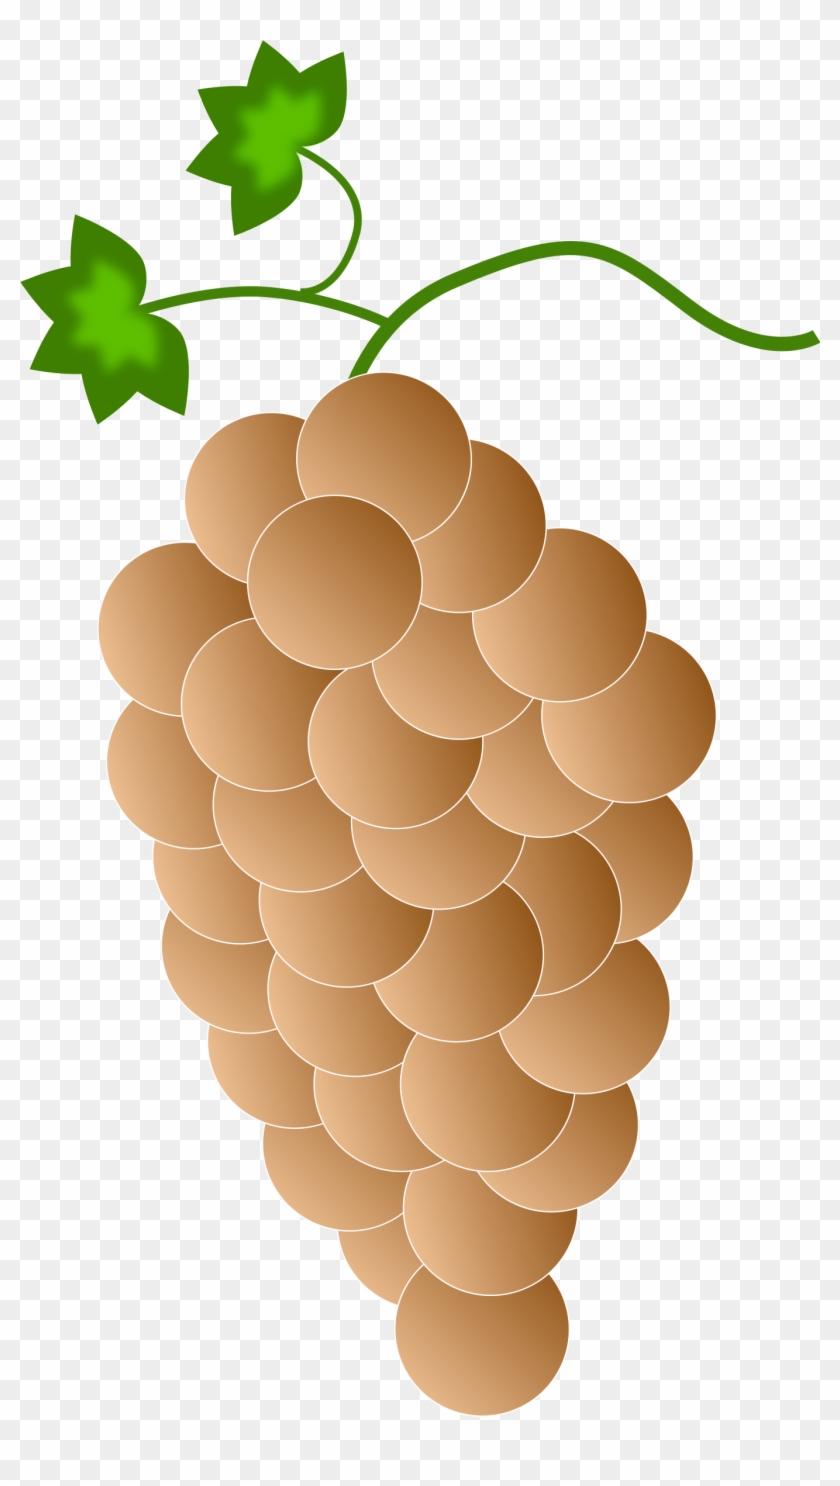 This Free Icons Png Design Of Orange Grapes Clipart